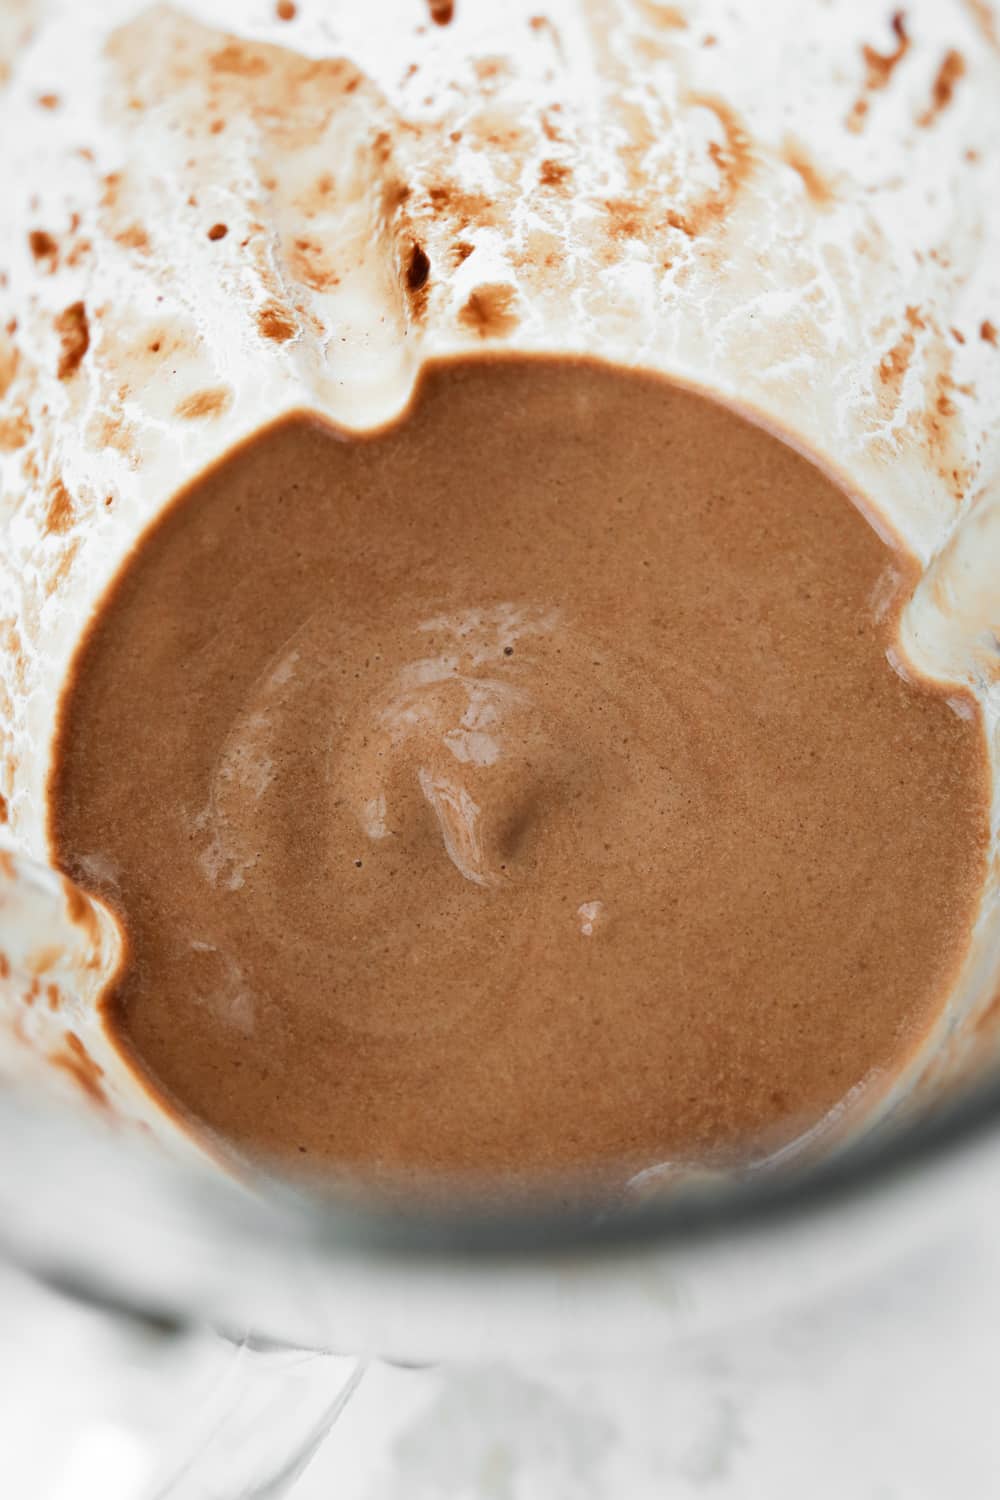 A chocolate frosty in a blender.